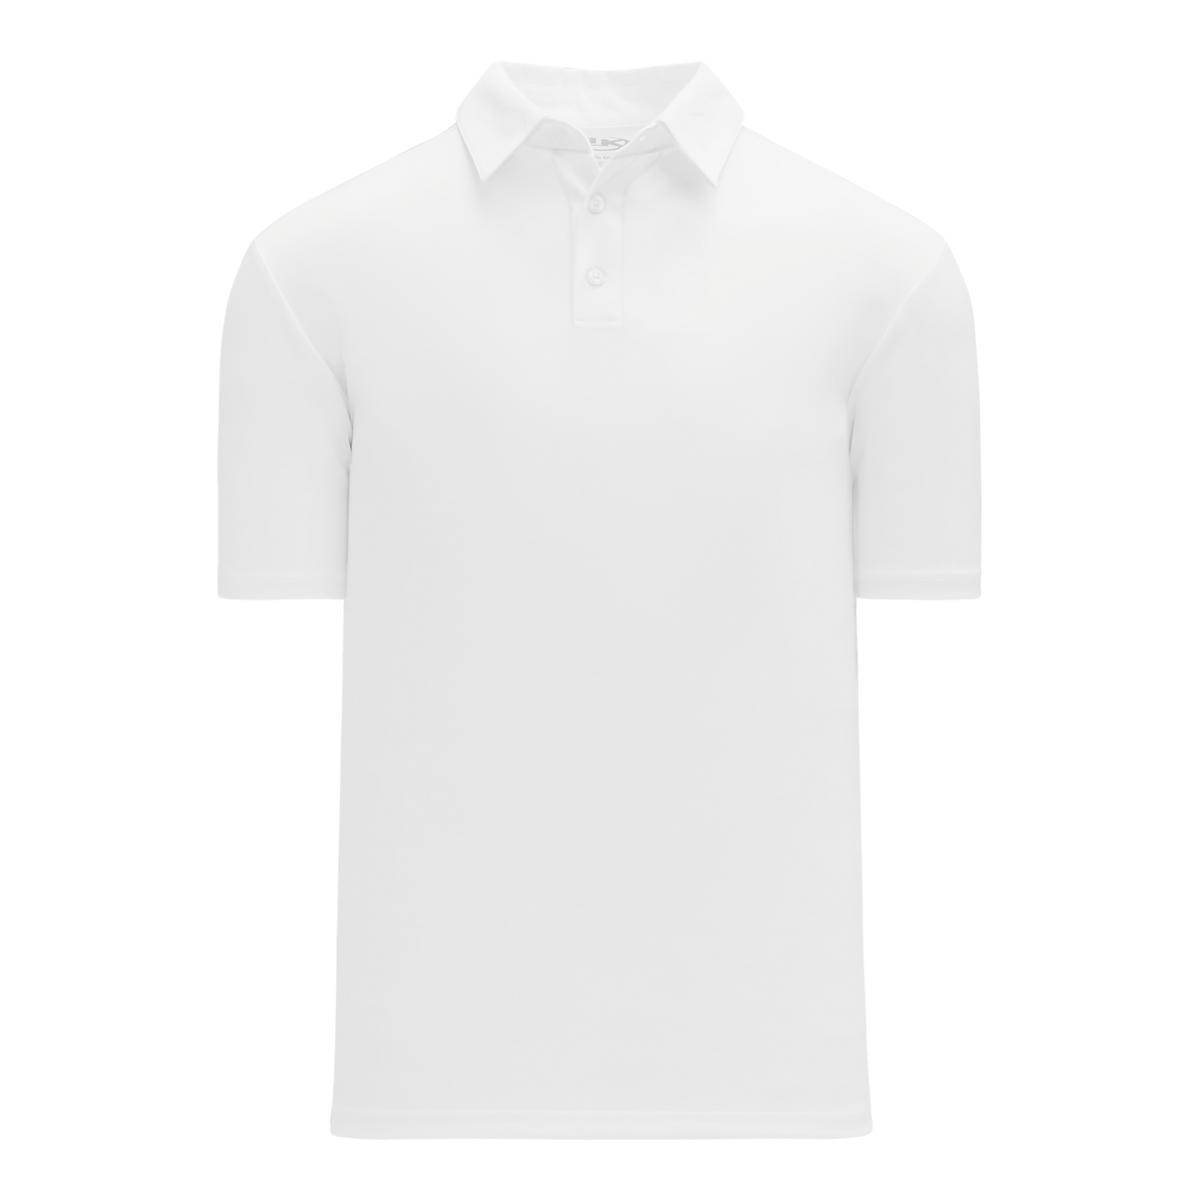 Athletic Knit (AK) A1810Y-000 Youth White Short Sleeve Polo Shirt – PSH ...